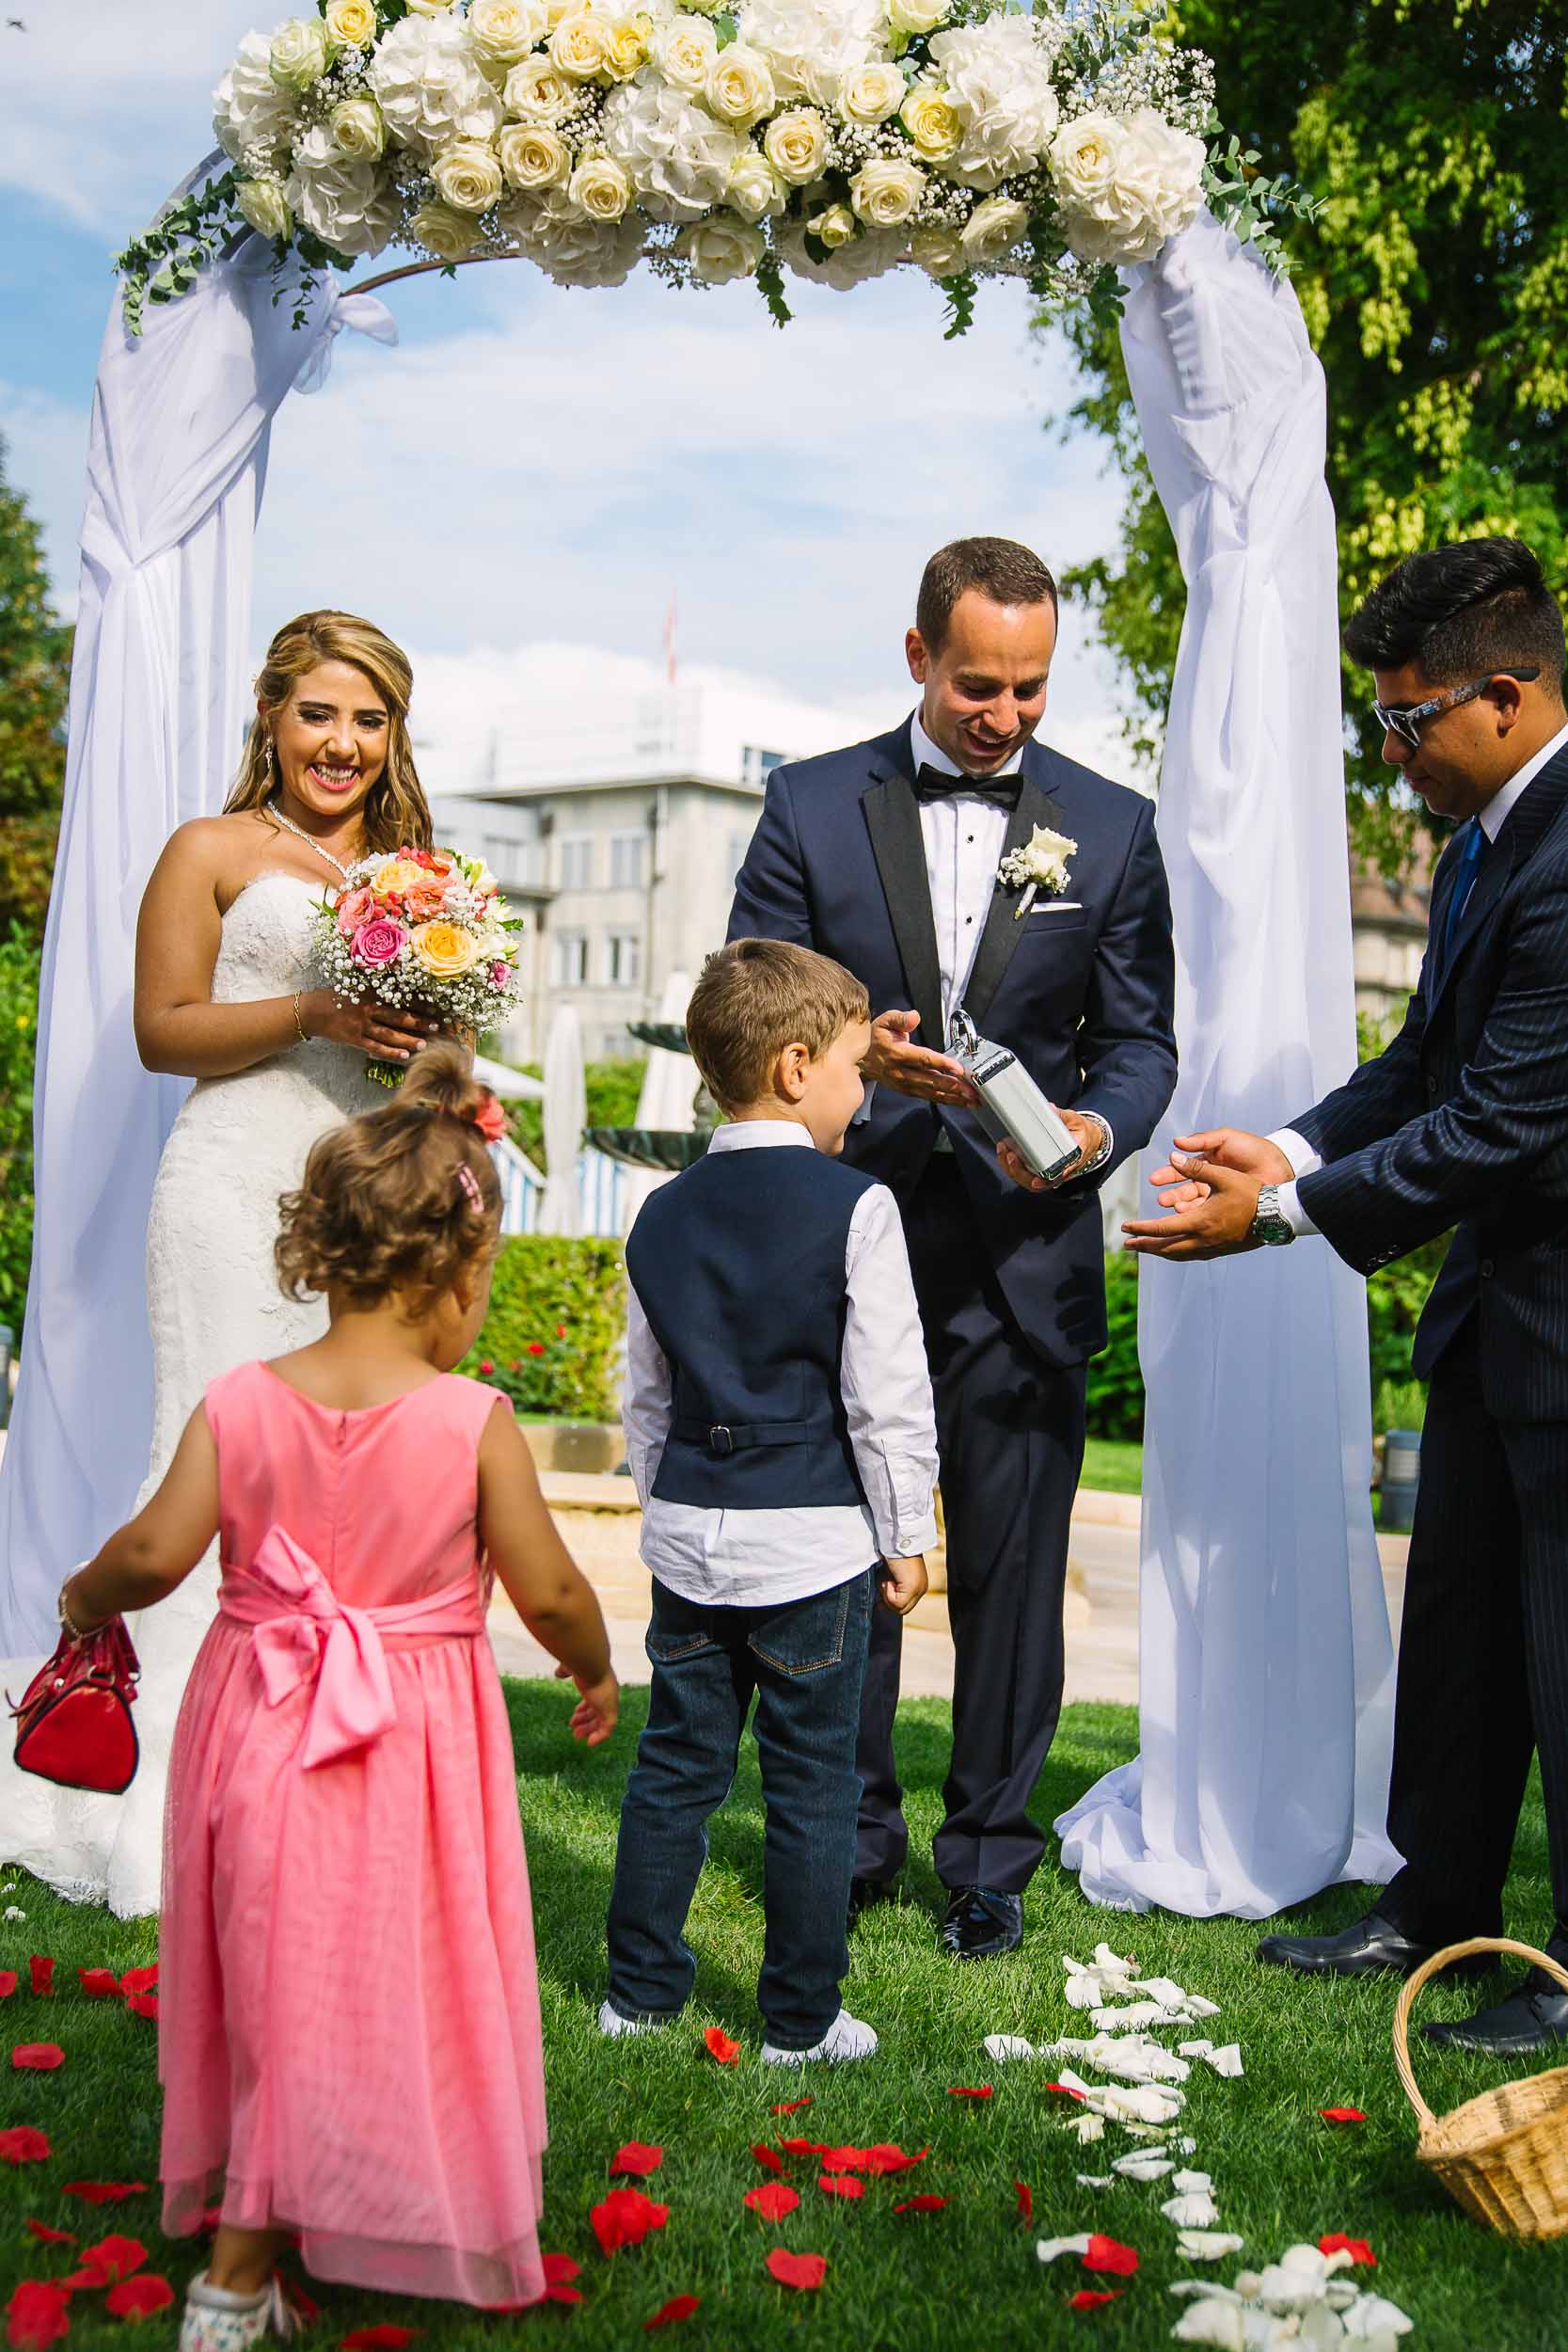 Enjoy every minute of your wedding ceremony without worrying about delays.